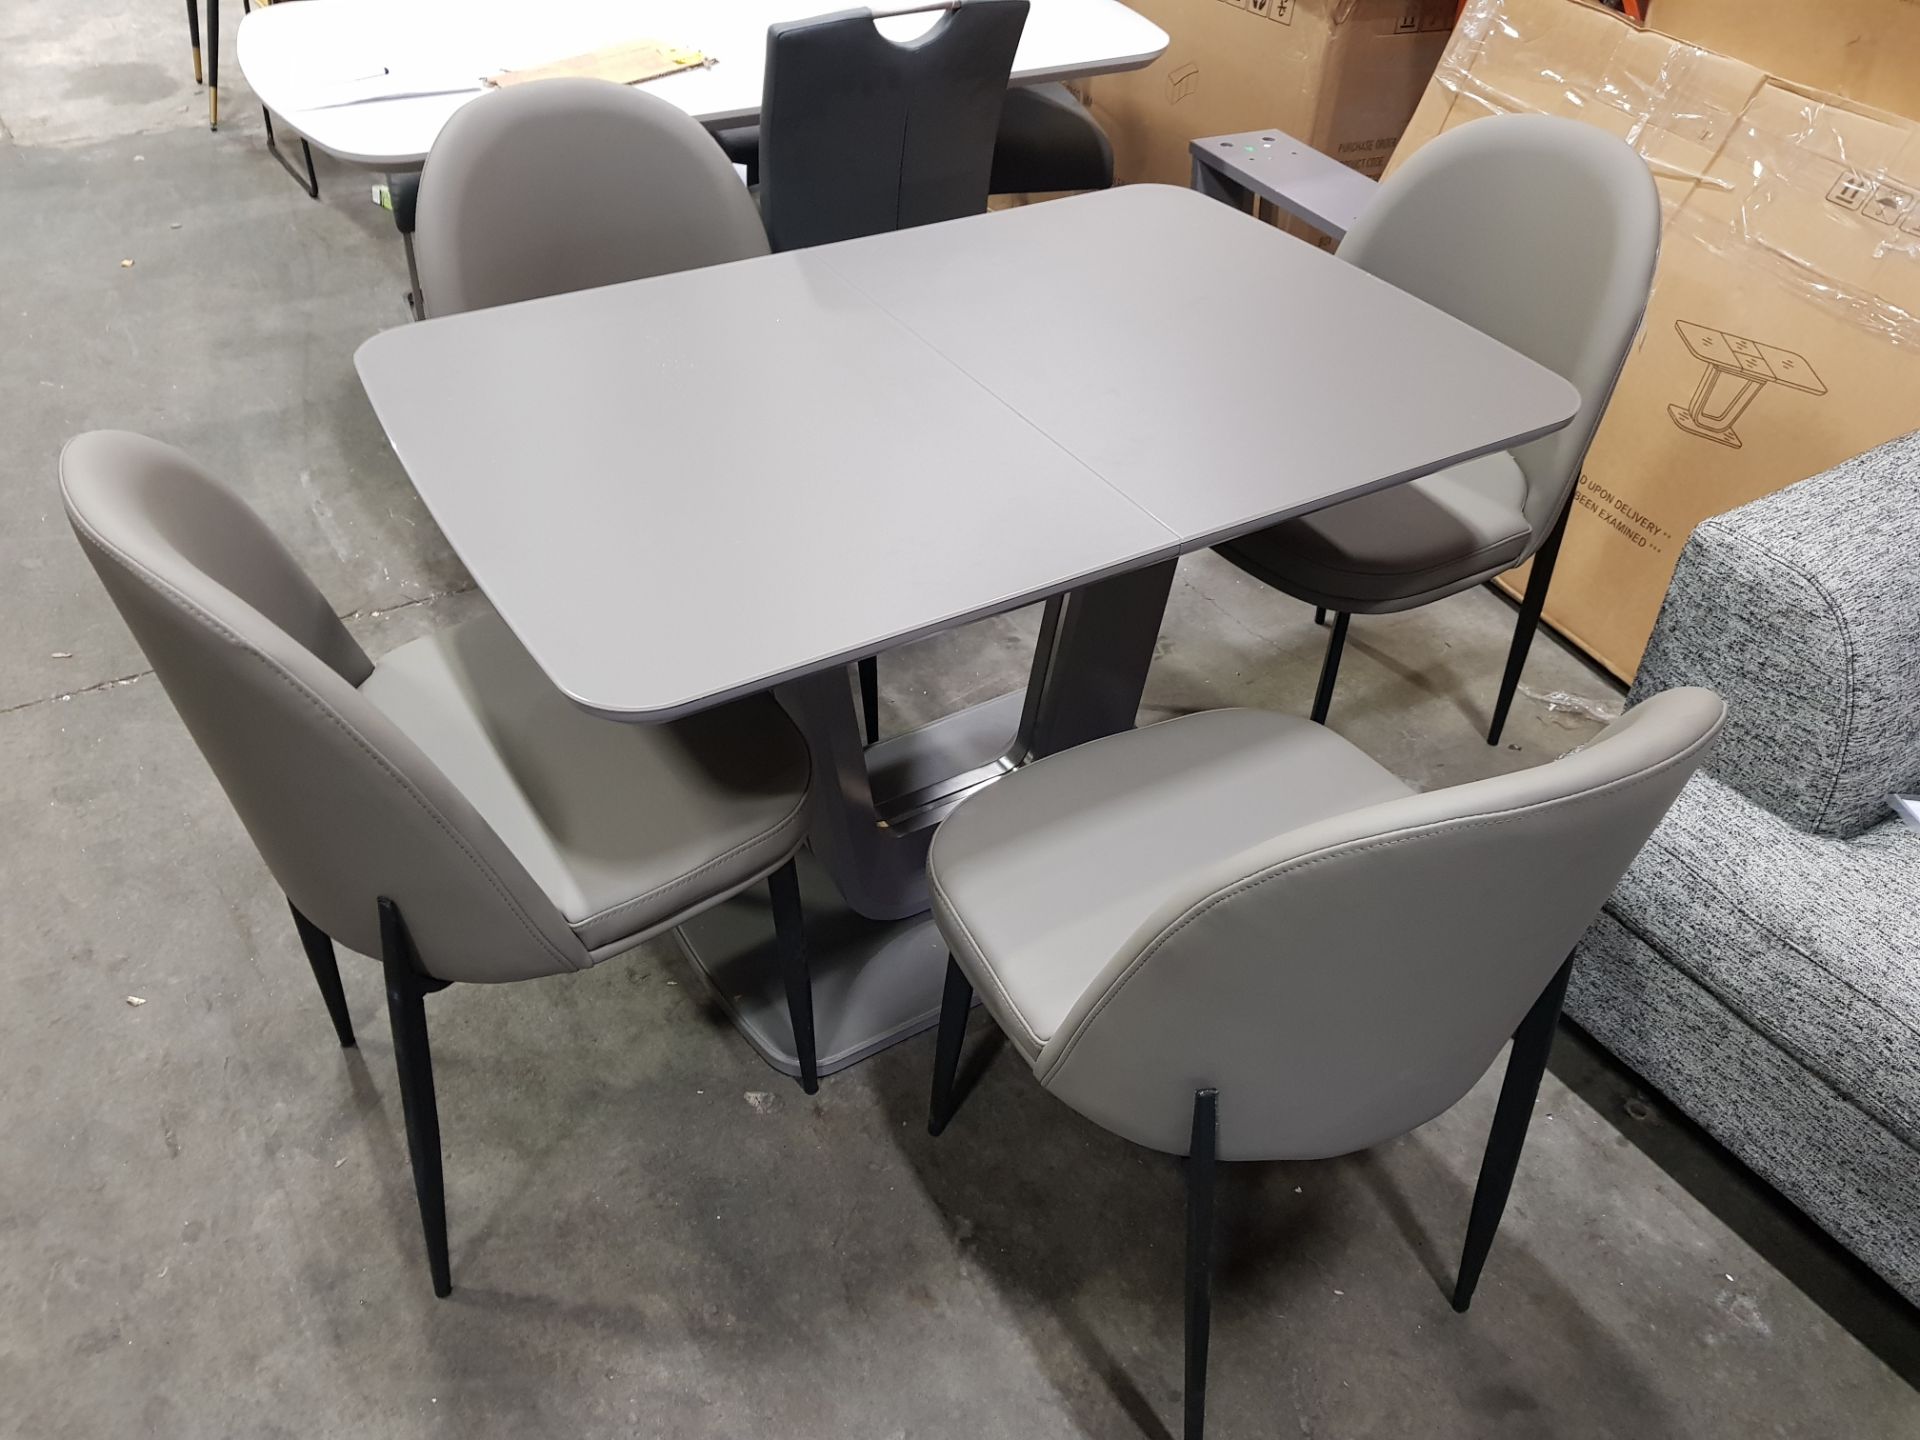 1 X LAZZARO DINING TABLE IN GRAPHITE GREY EXTENDING 1200/1600 X 800mm WITH 4 X GREY LEATHER DINING